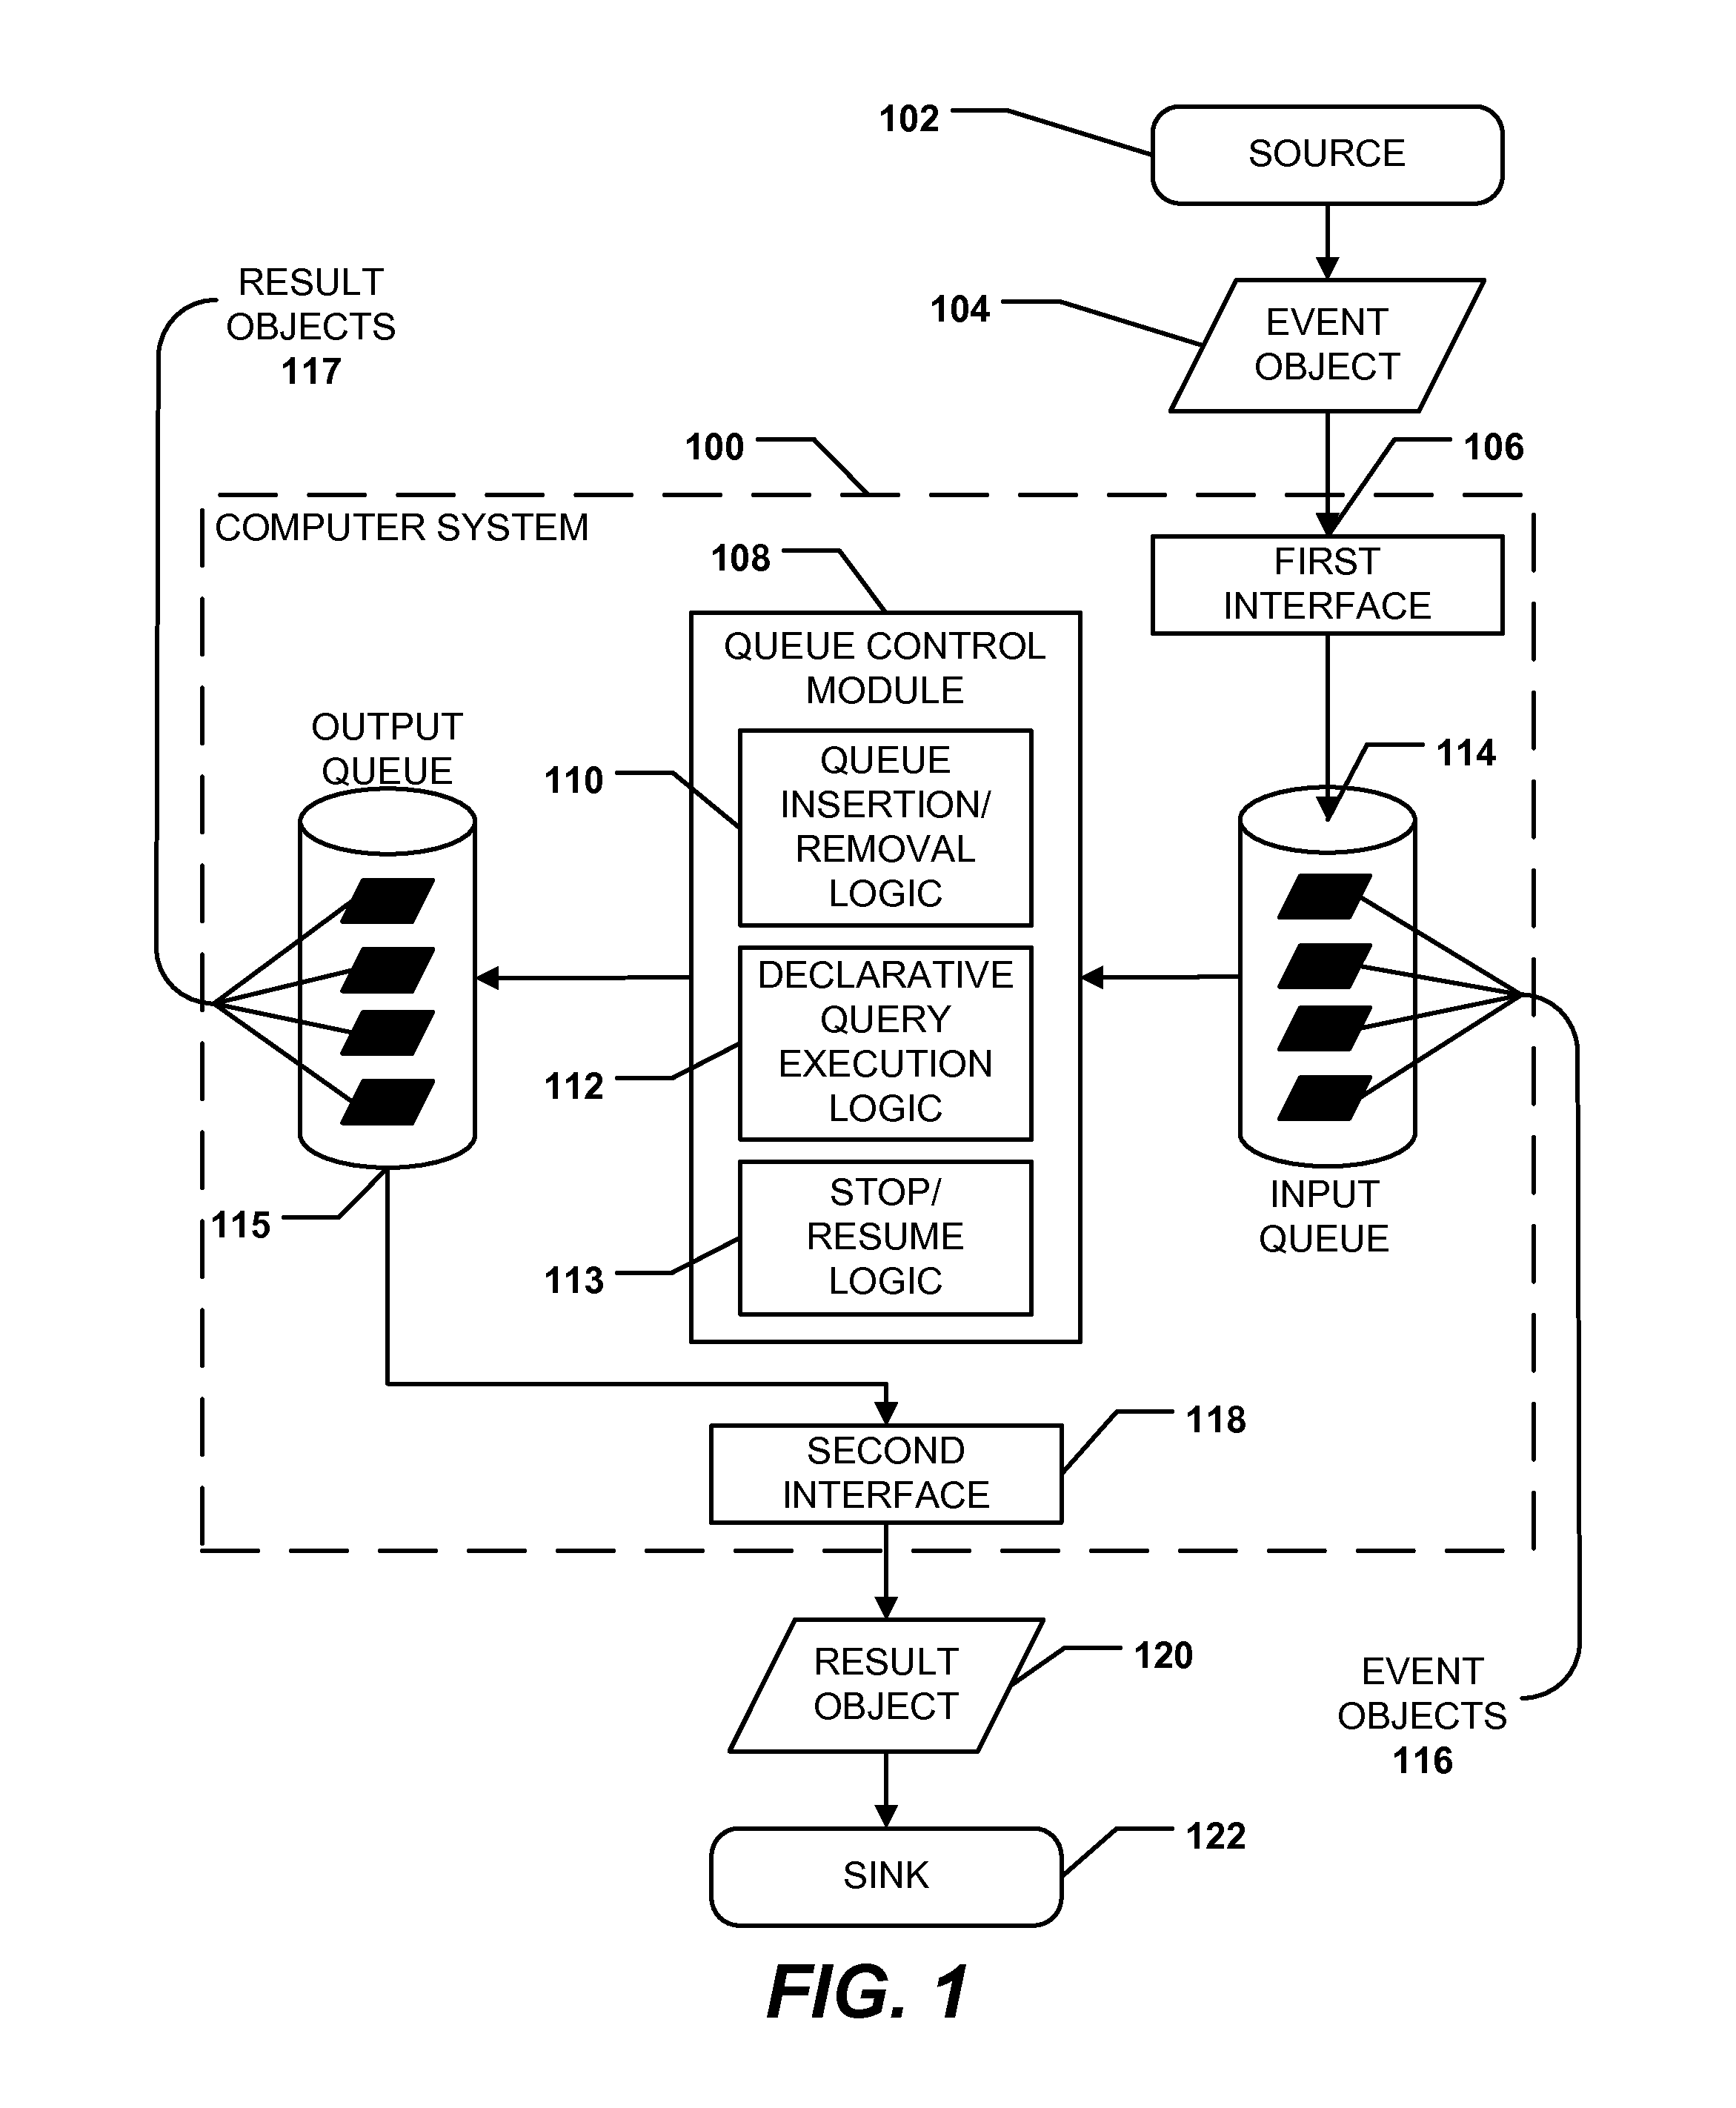 Adapters for event processing systems